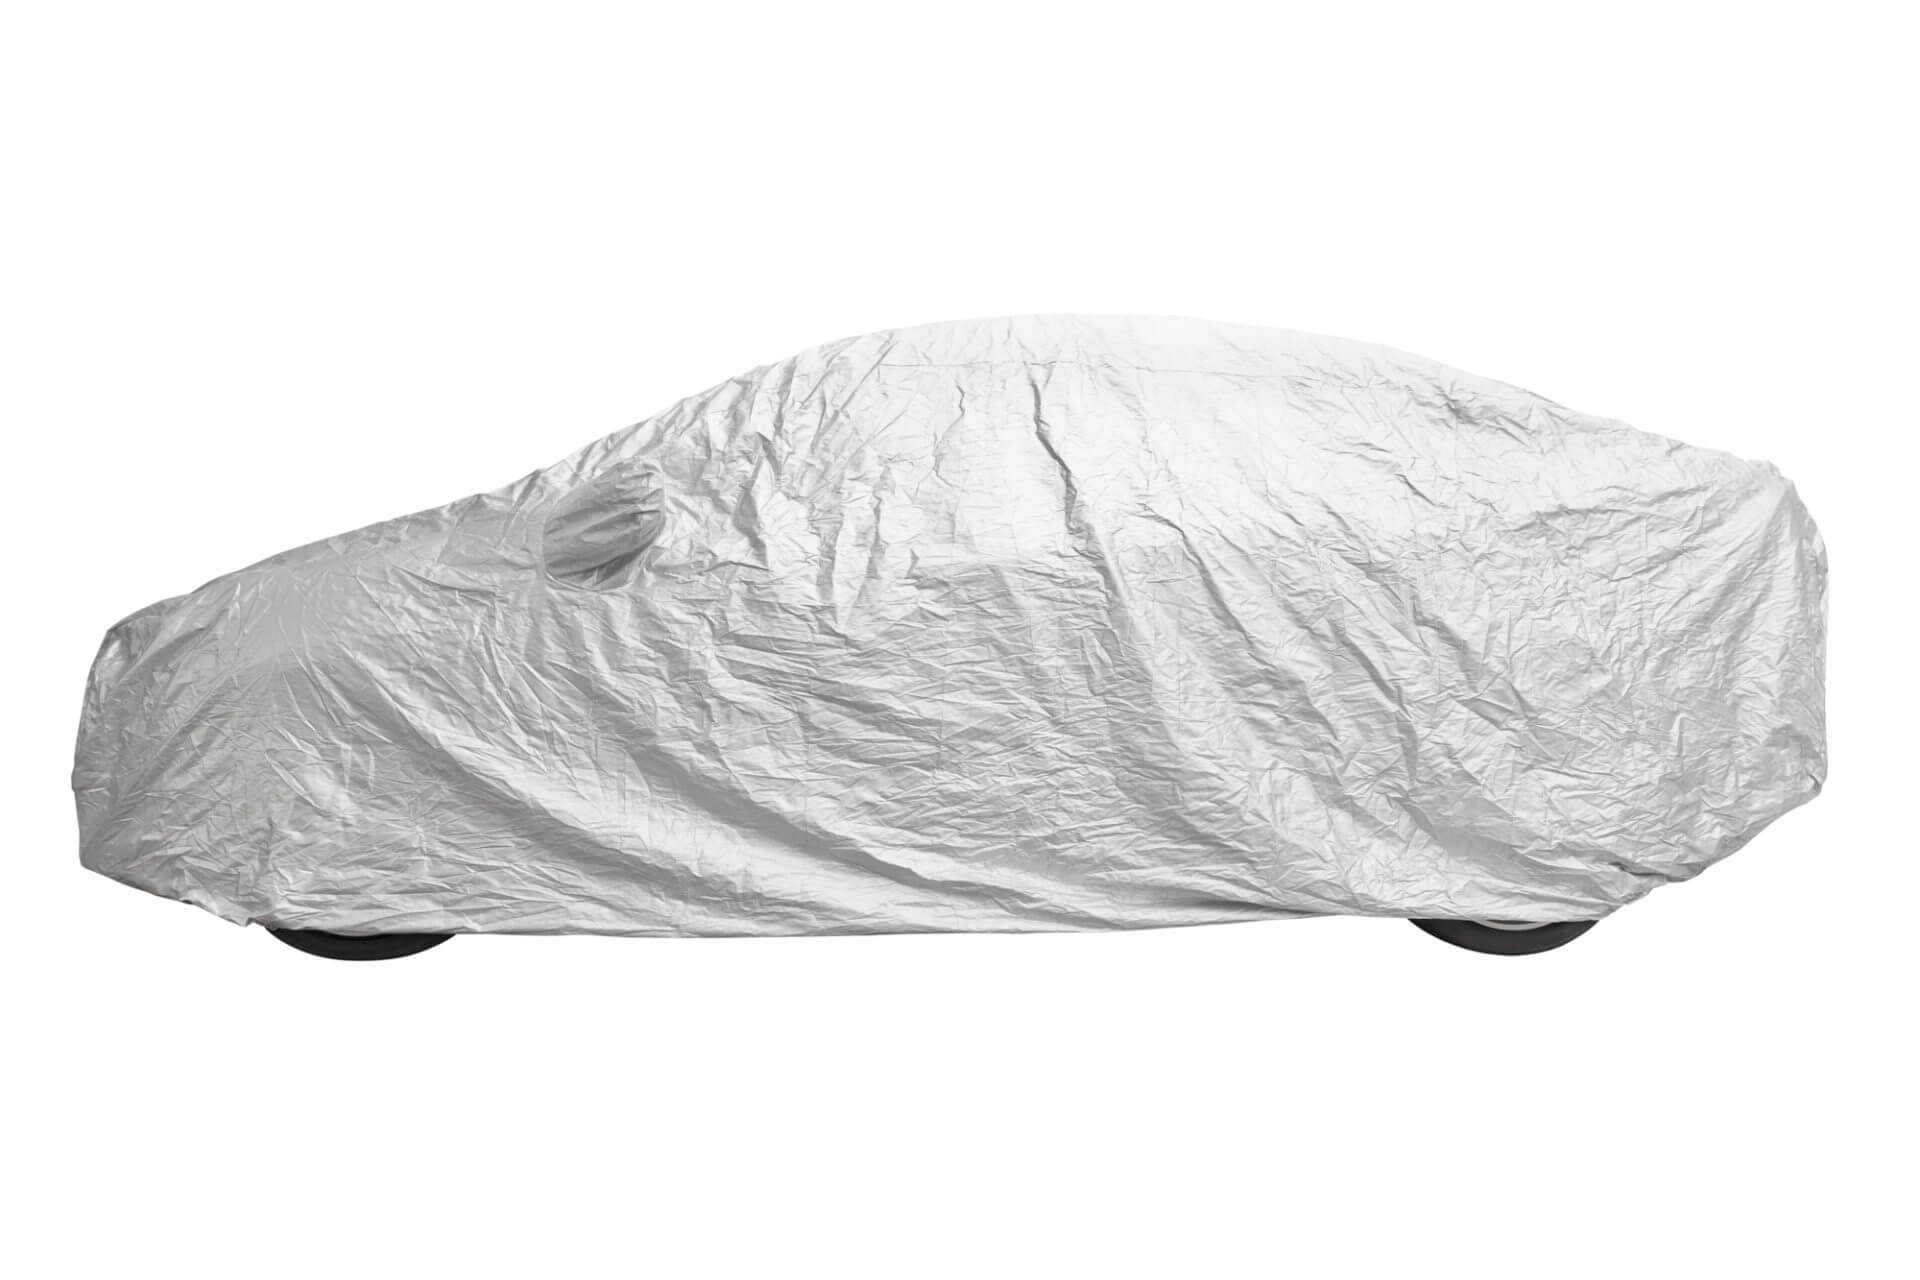 Can I Use a Car Cover to Protect My Car During Shipping?